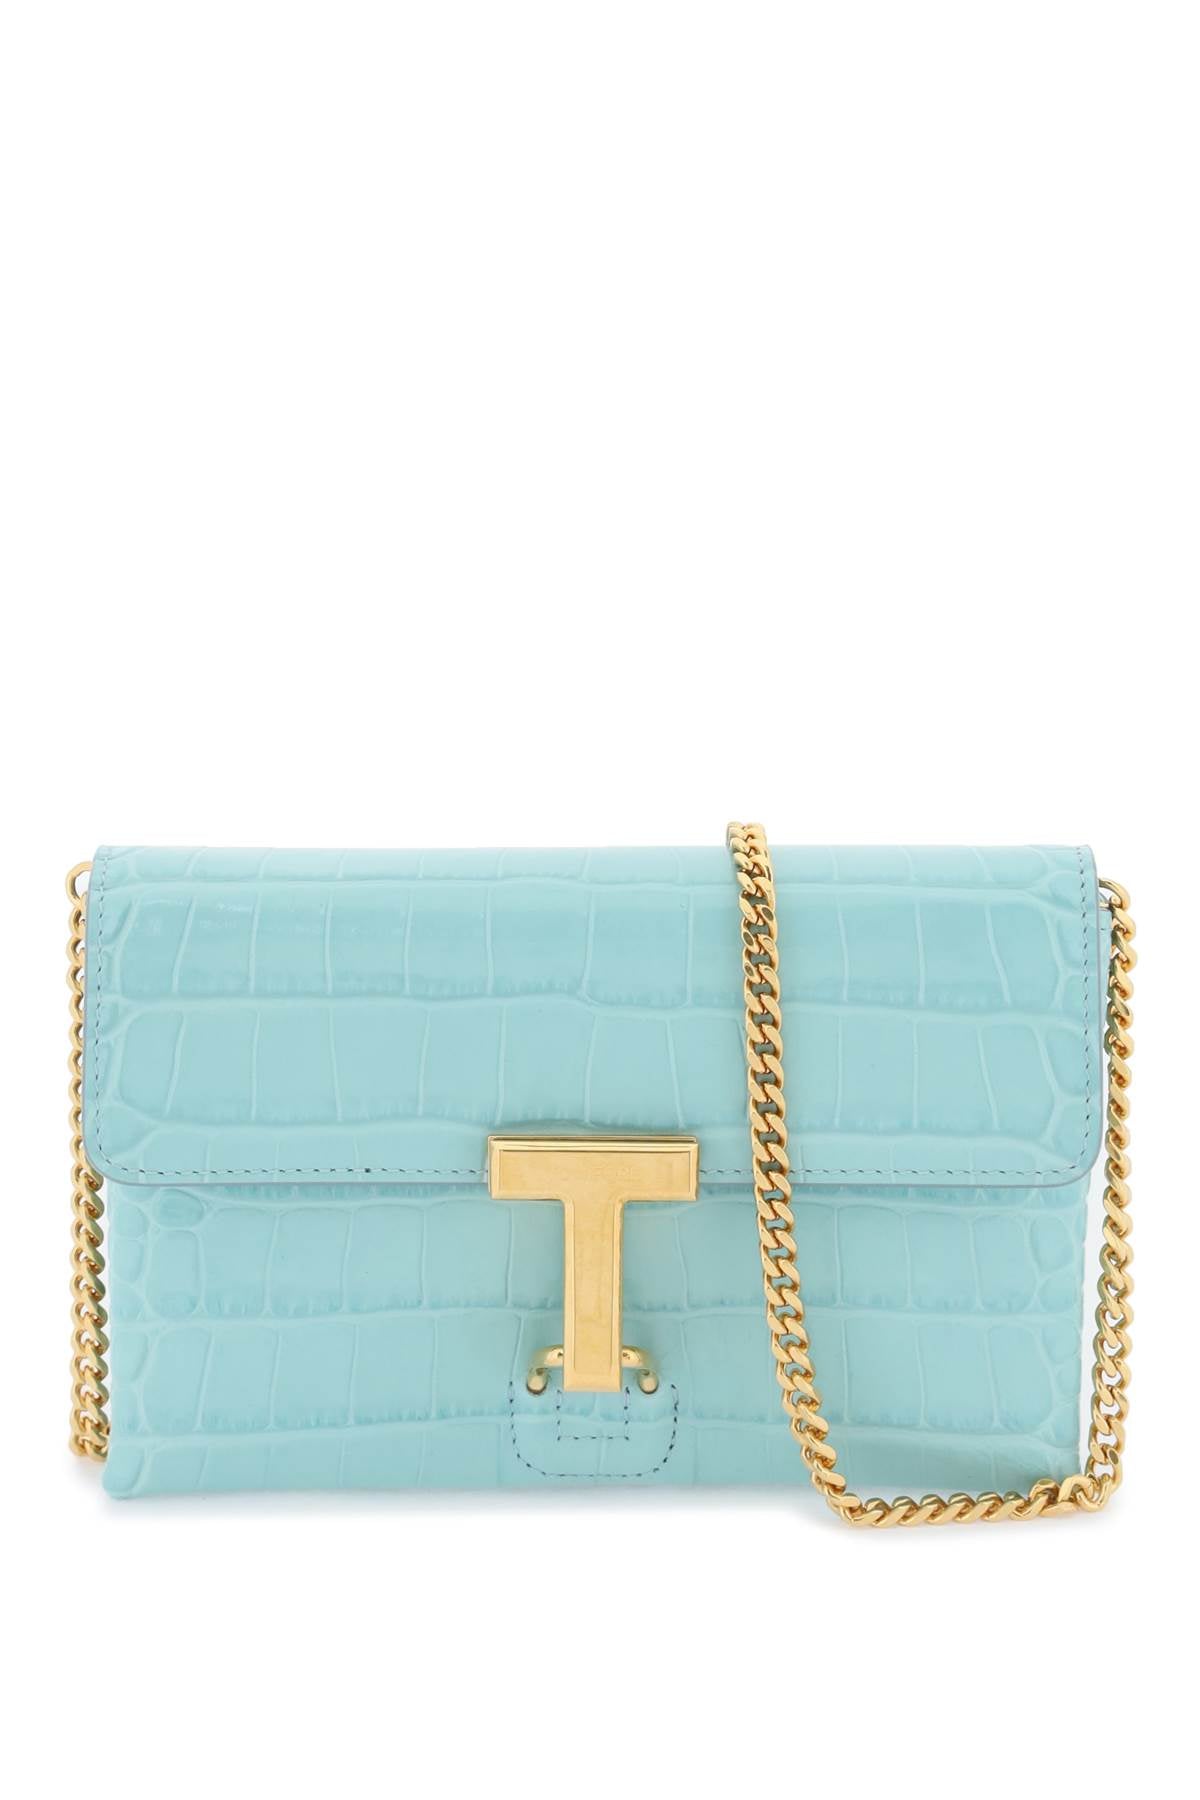 TOM FORD Light Blue Crocodile-Embossed Mini Leather Clutch with Gold-Tone Chain Strap